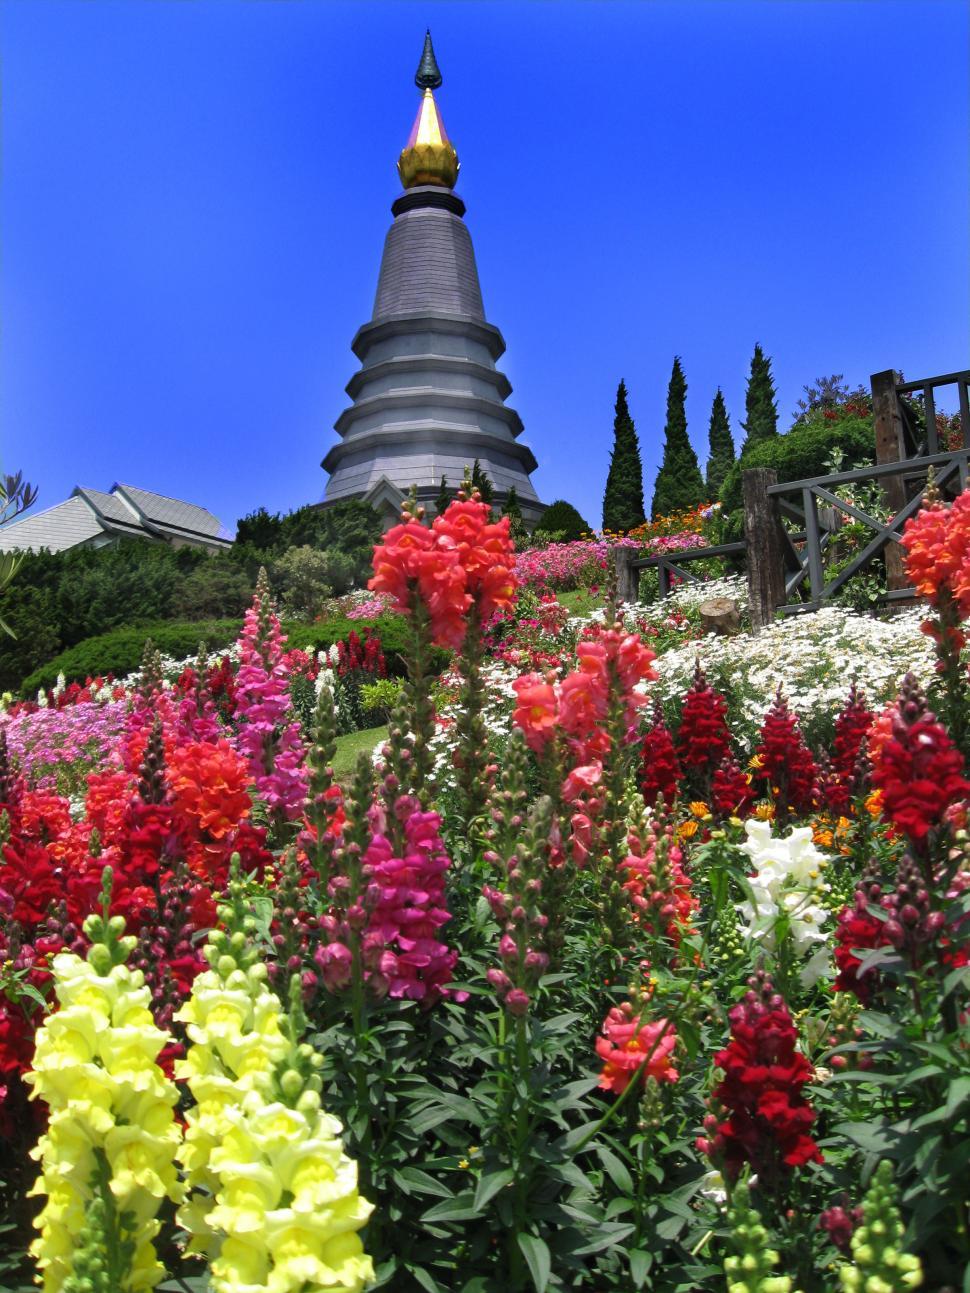 Free Image of king and queen pagoda in thailand 